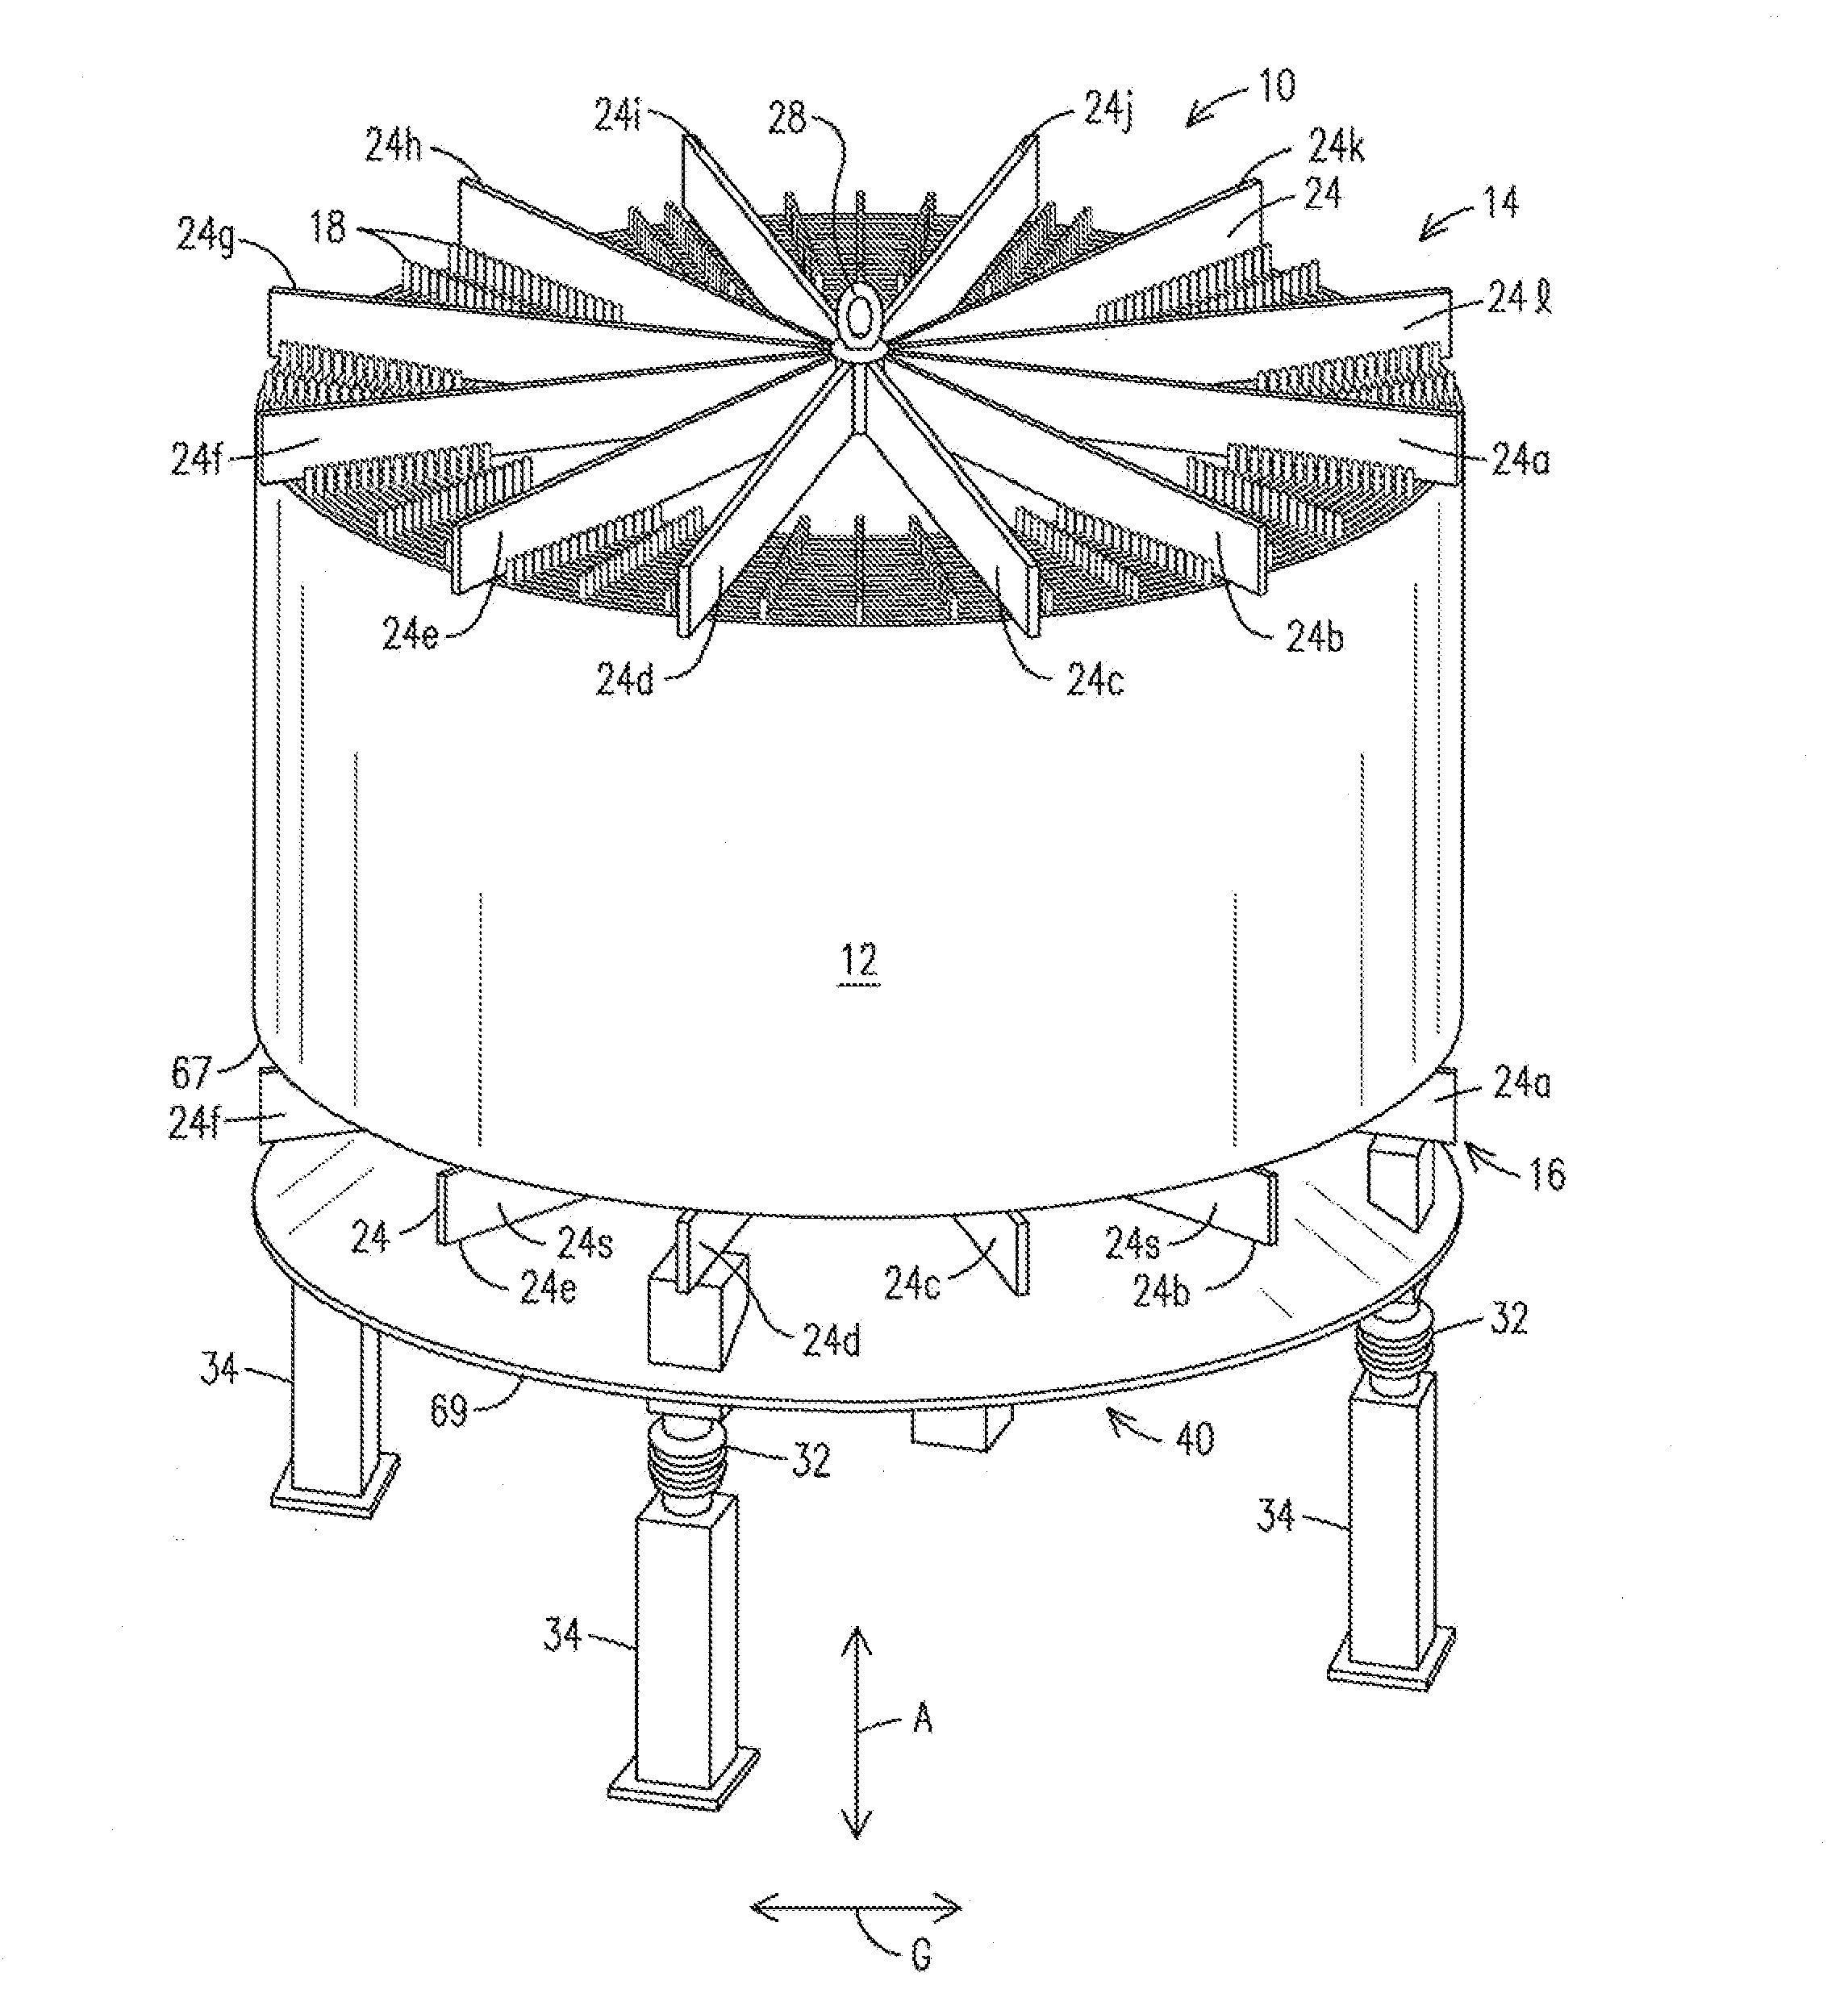 Apparatus and method for mitigating thermal excursions in air core reactors due to wind effects